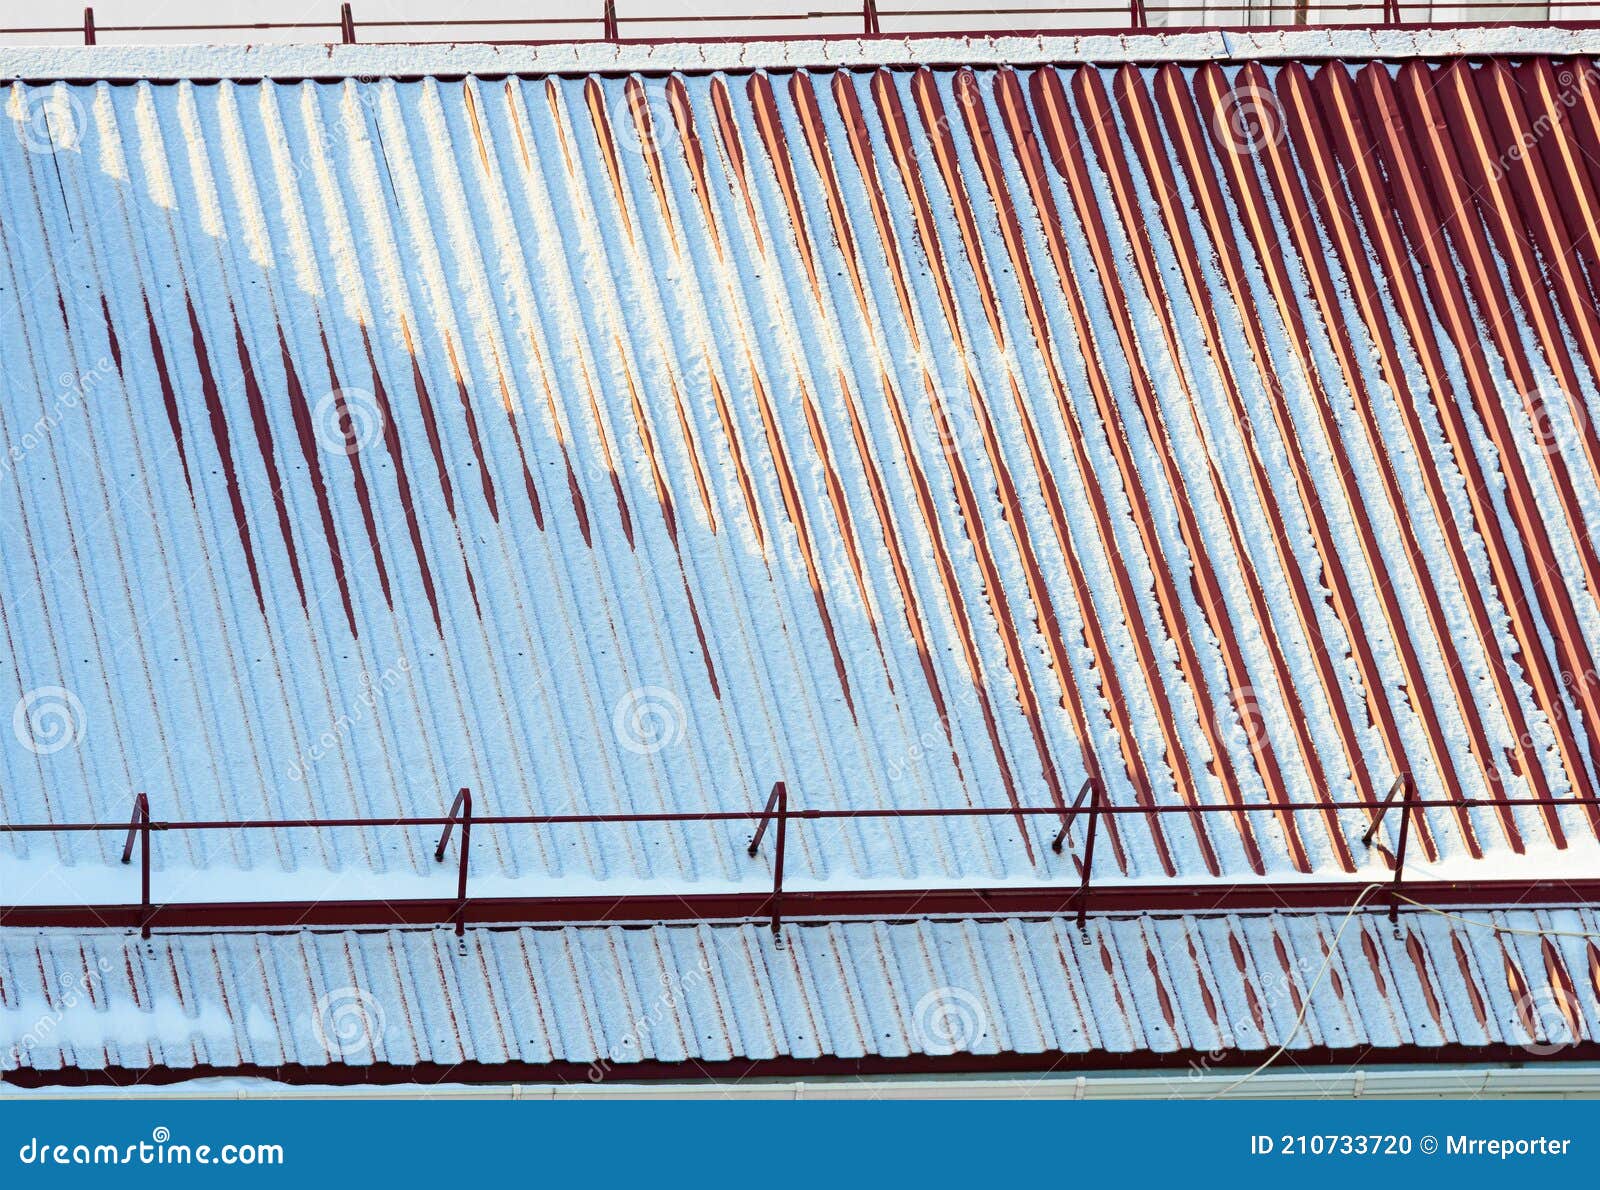 Metallic Profiled Roofing at Snowy Sunny Day Stock Photo - Image of ...